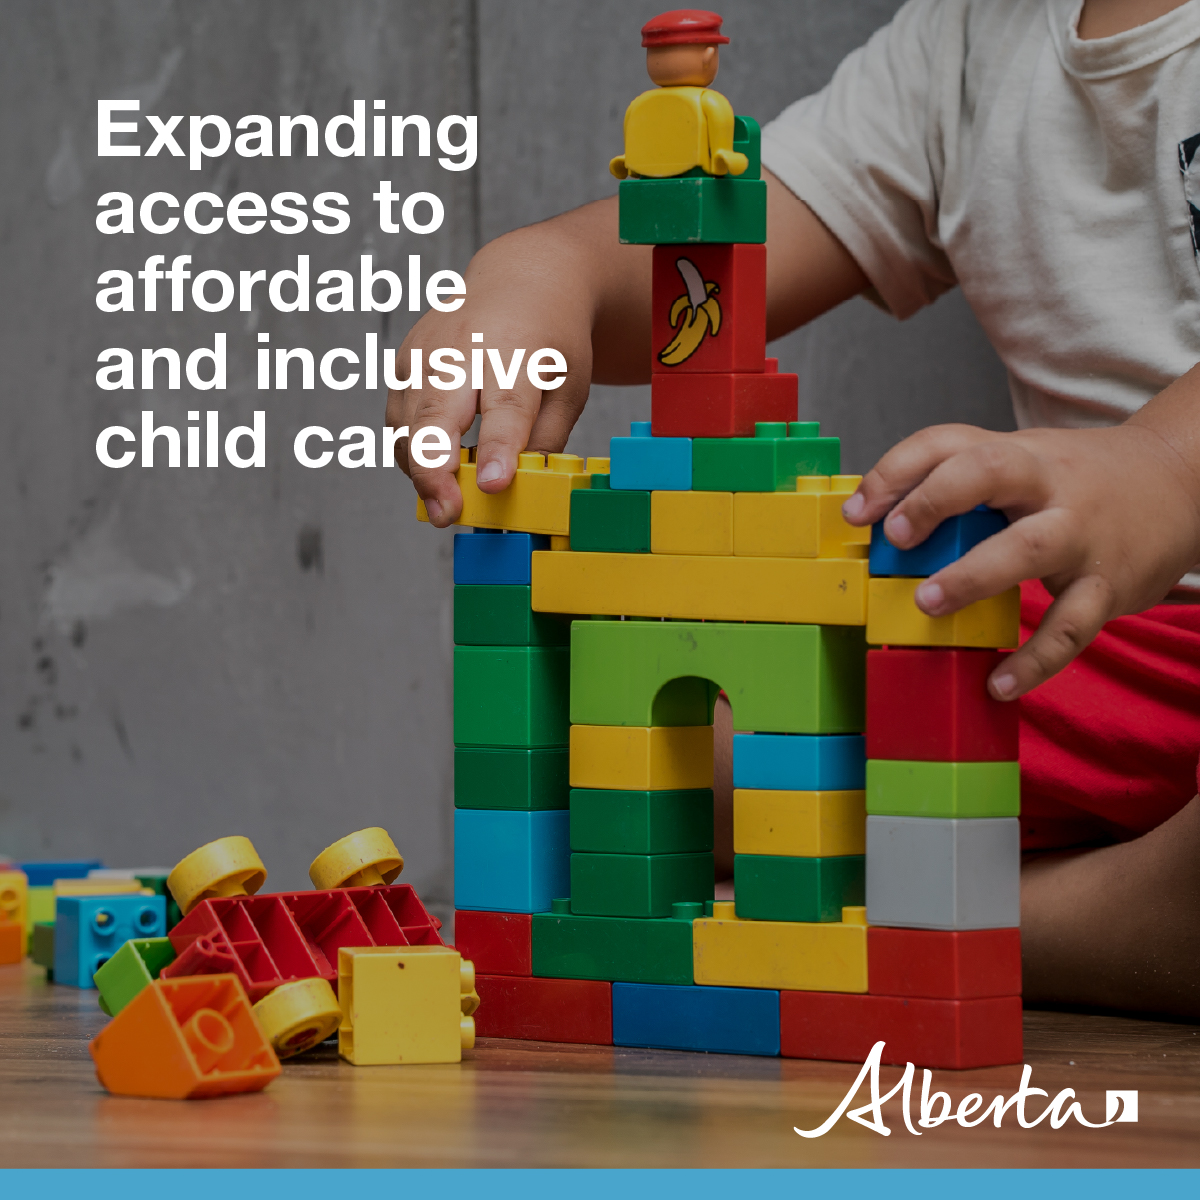 Today, ministers @MattJonesYYC and @R_Boissonnault announced more than $78 million is being invested through the Early Learning and Child Care Infrastructure Fund to support the creation of high-quality, affordable and inclusive child-care spaces where AB families need them most.